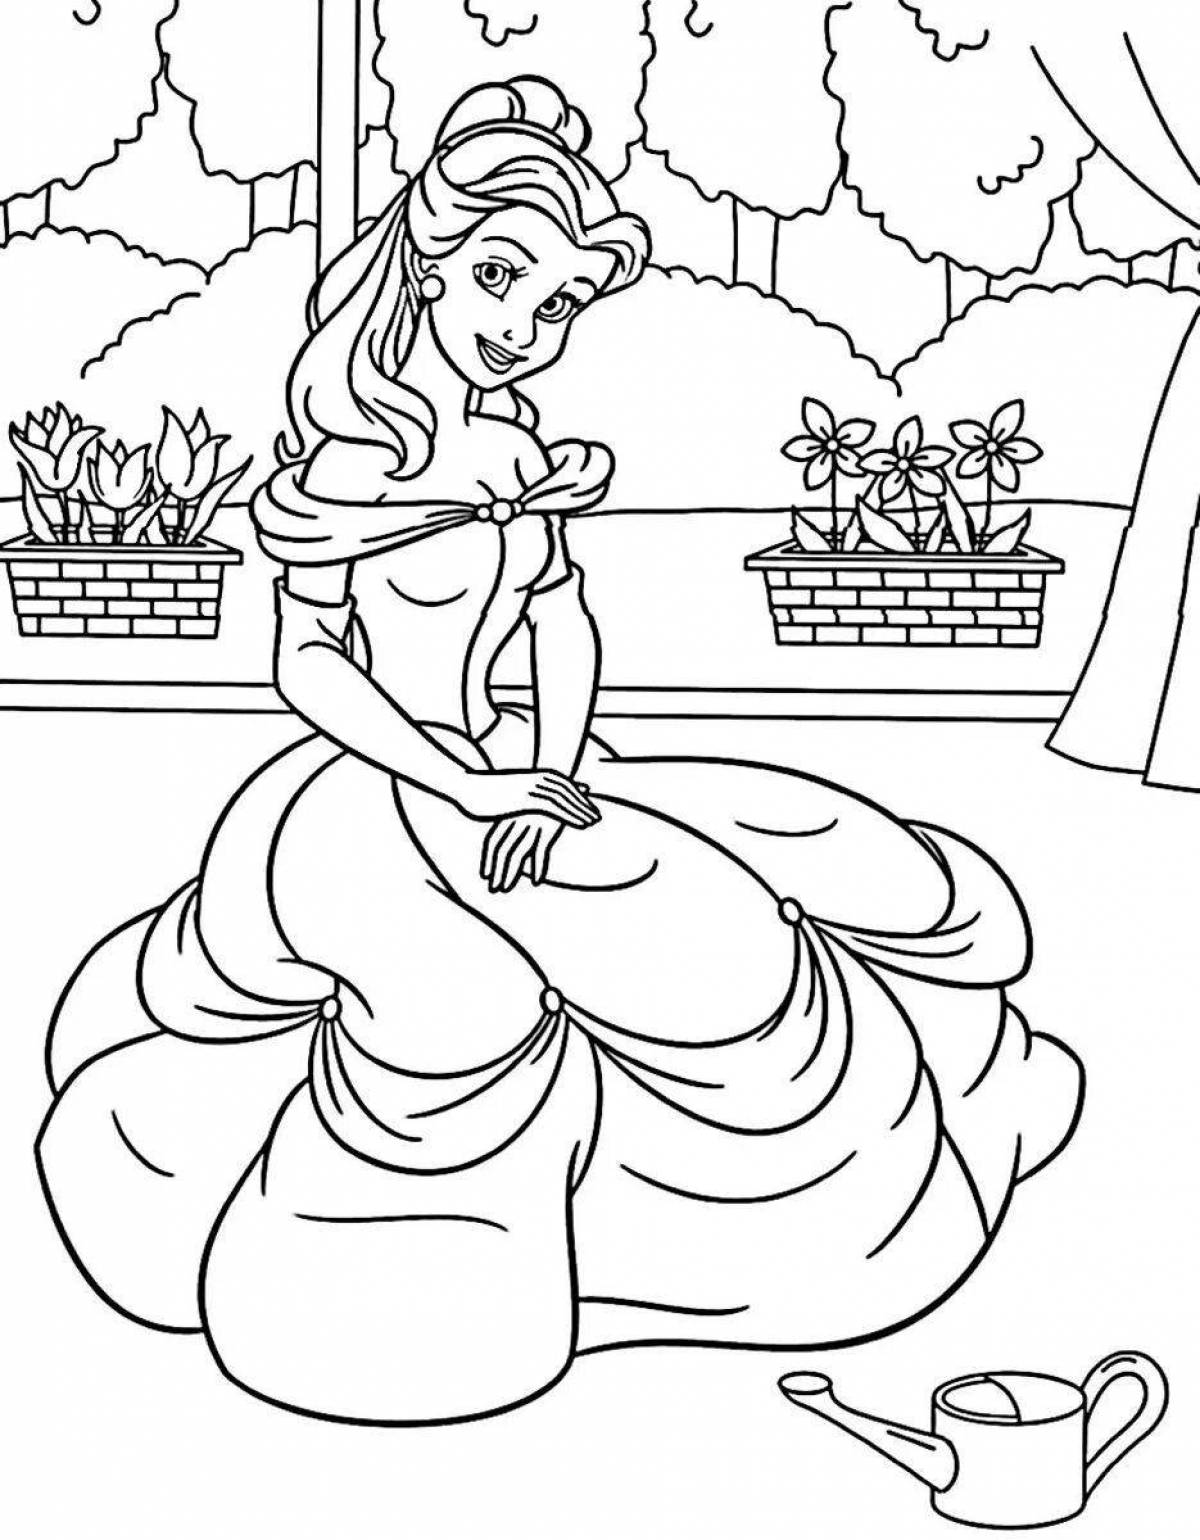 Coloring book for kids with Disney princesses